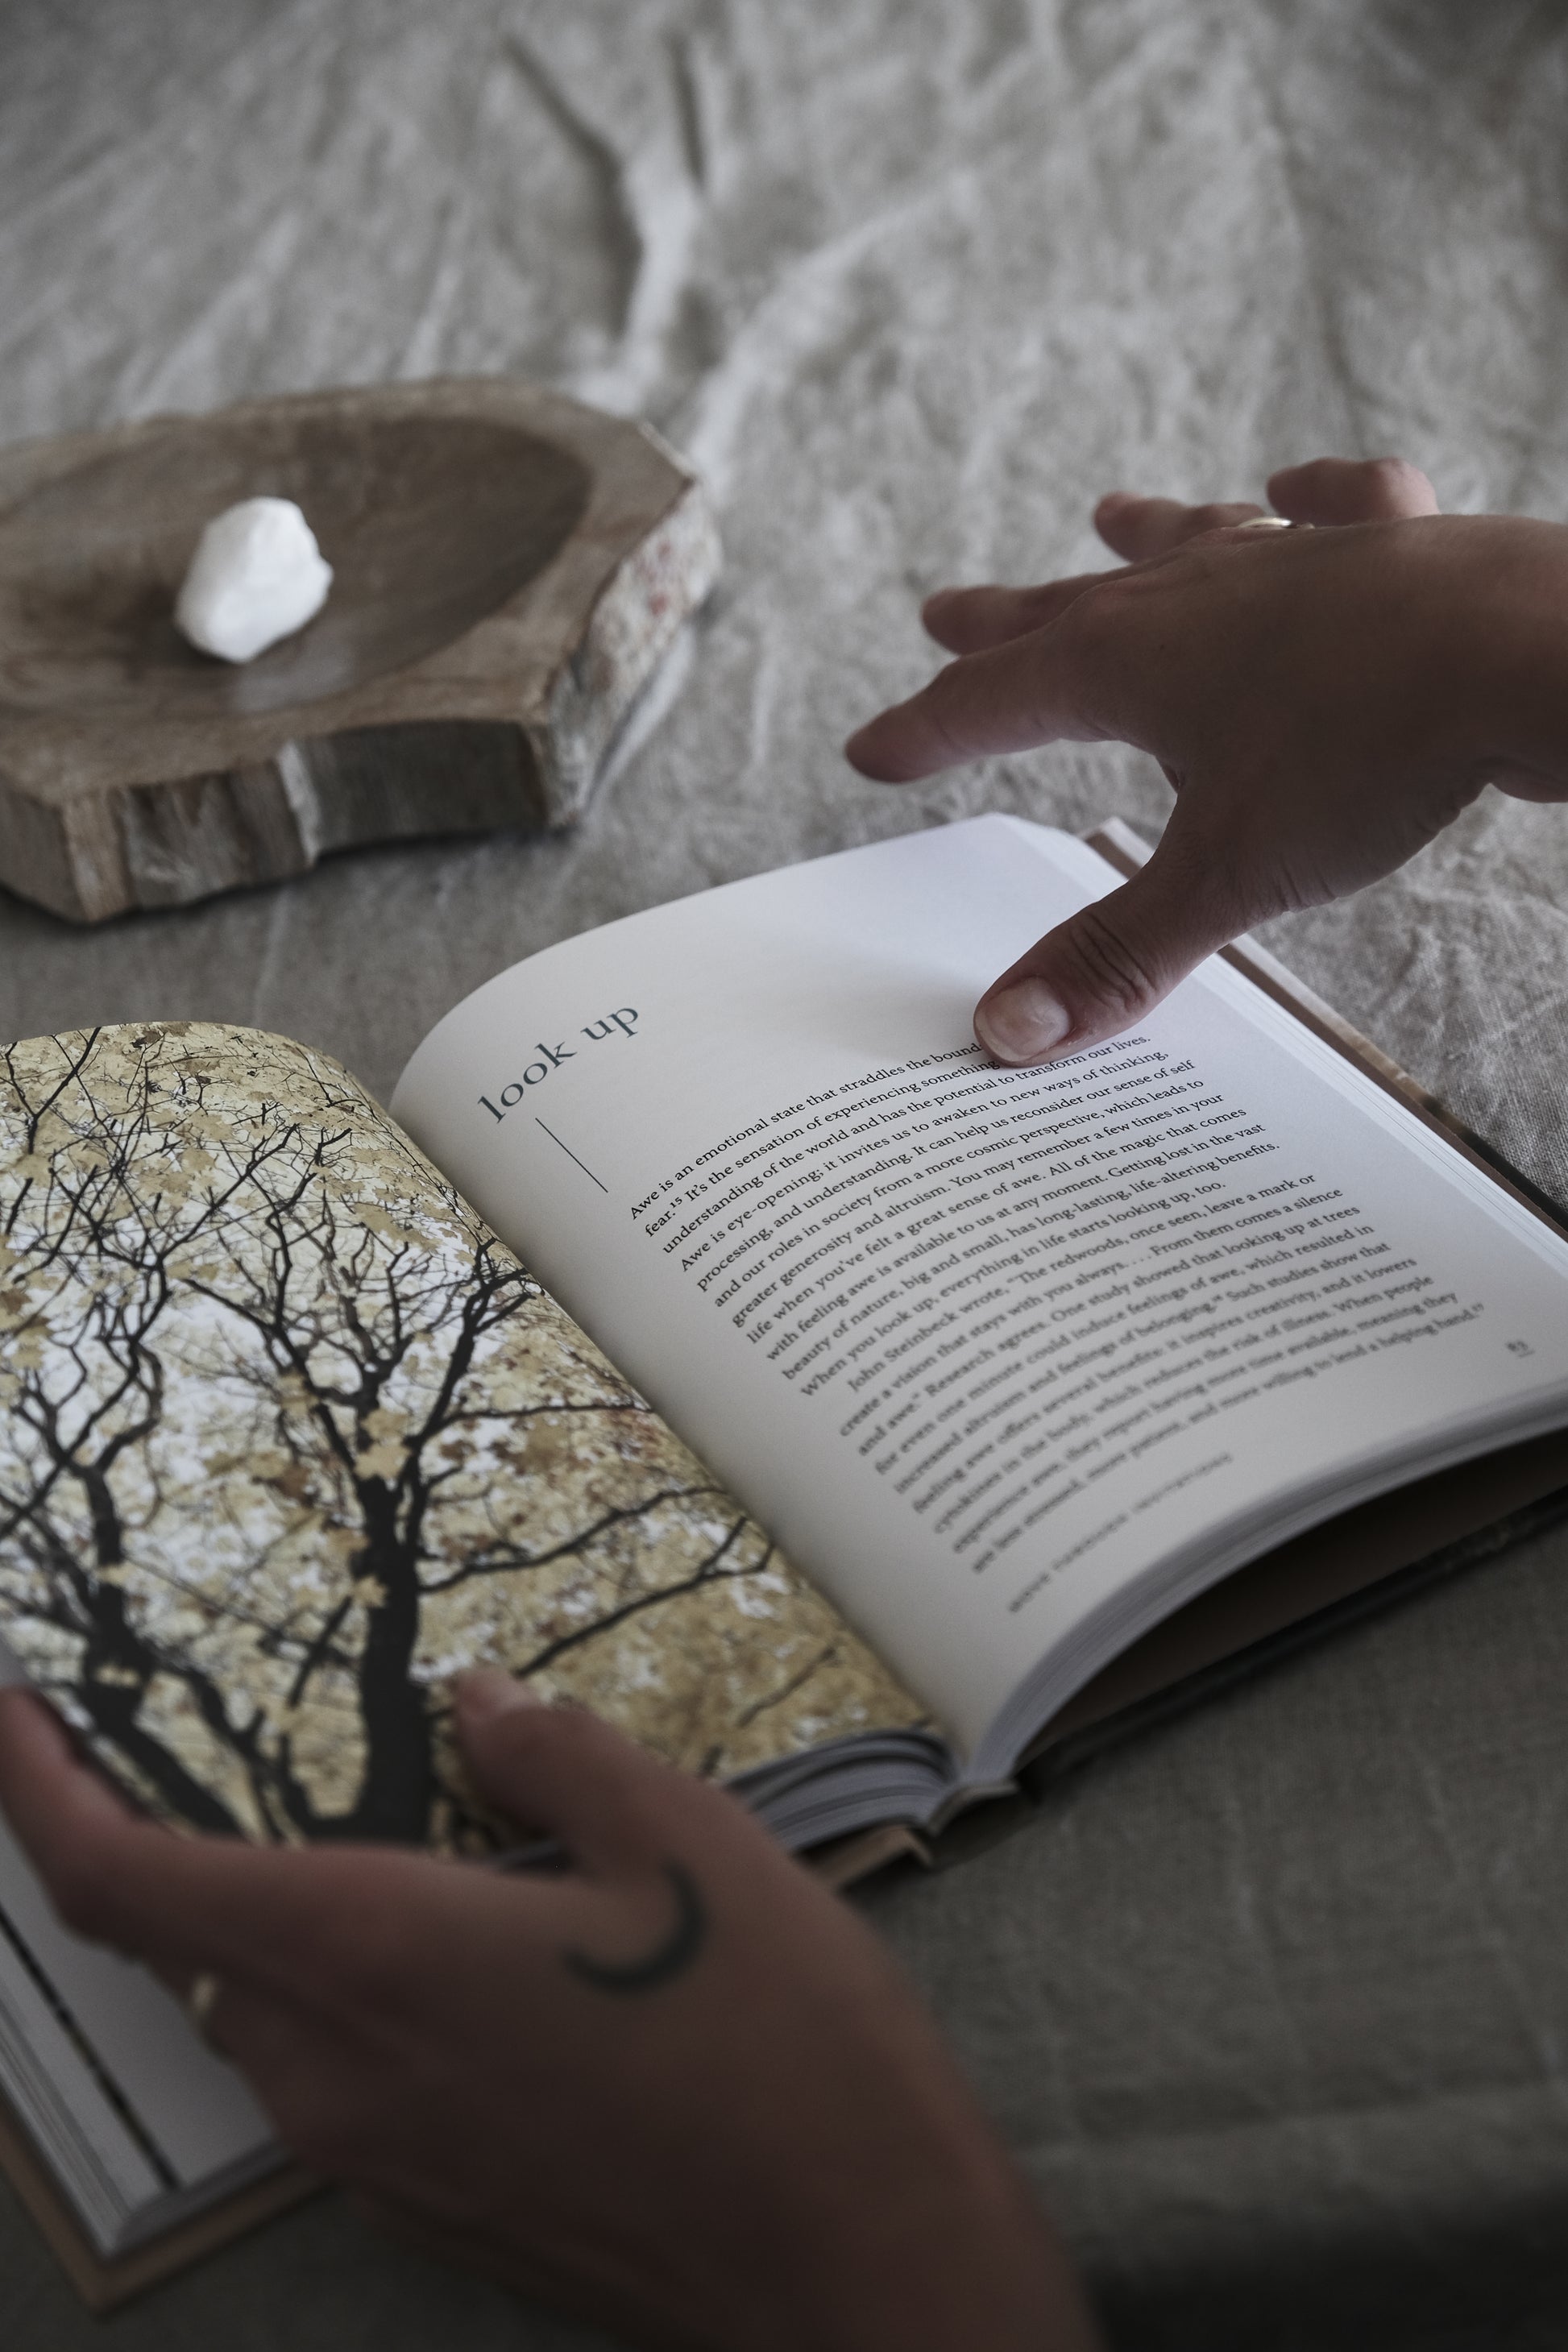 Image of the book Forest Bathing from Terra Cruda's book collection